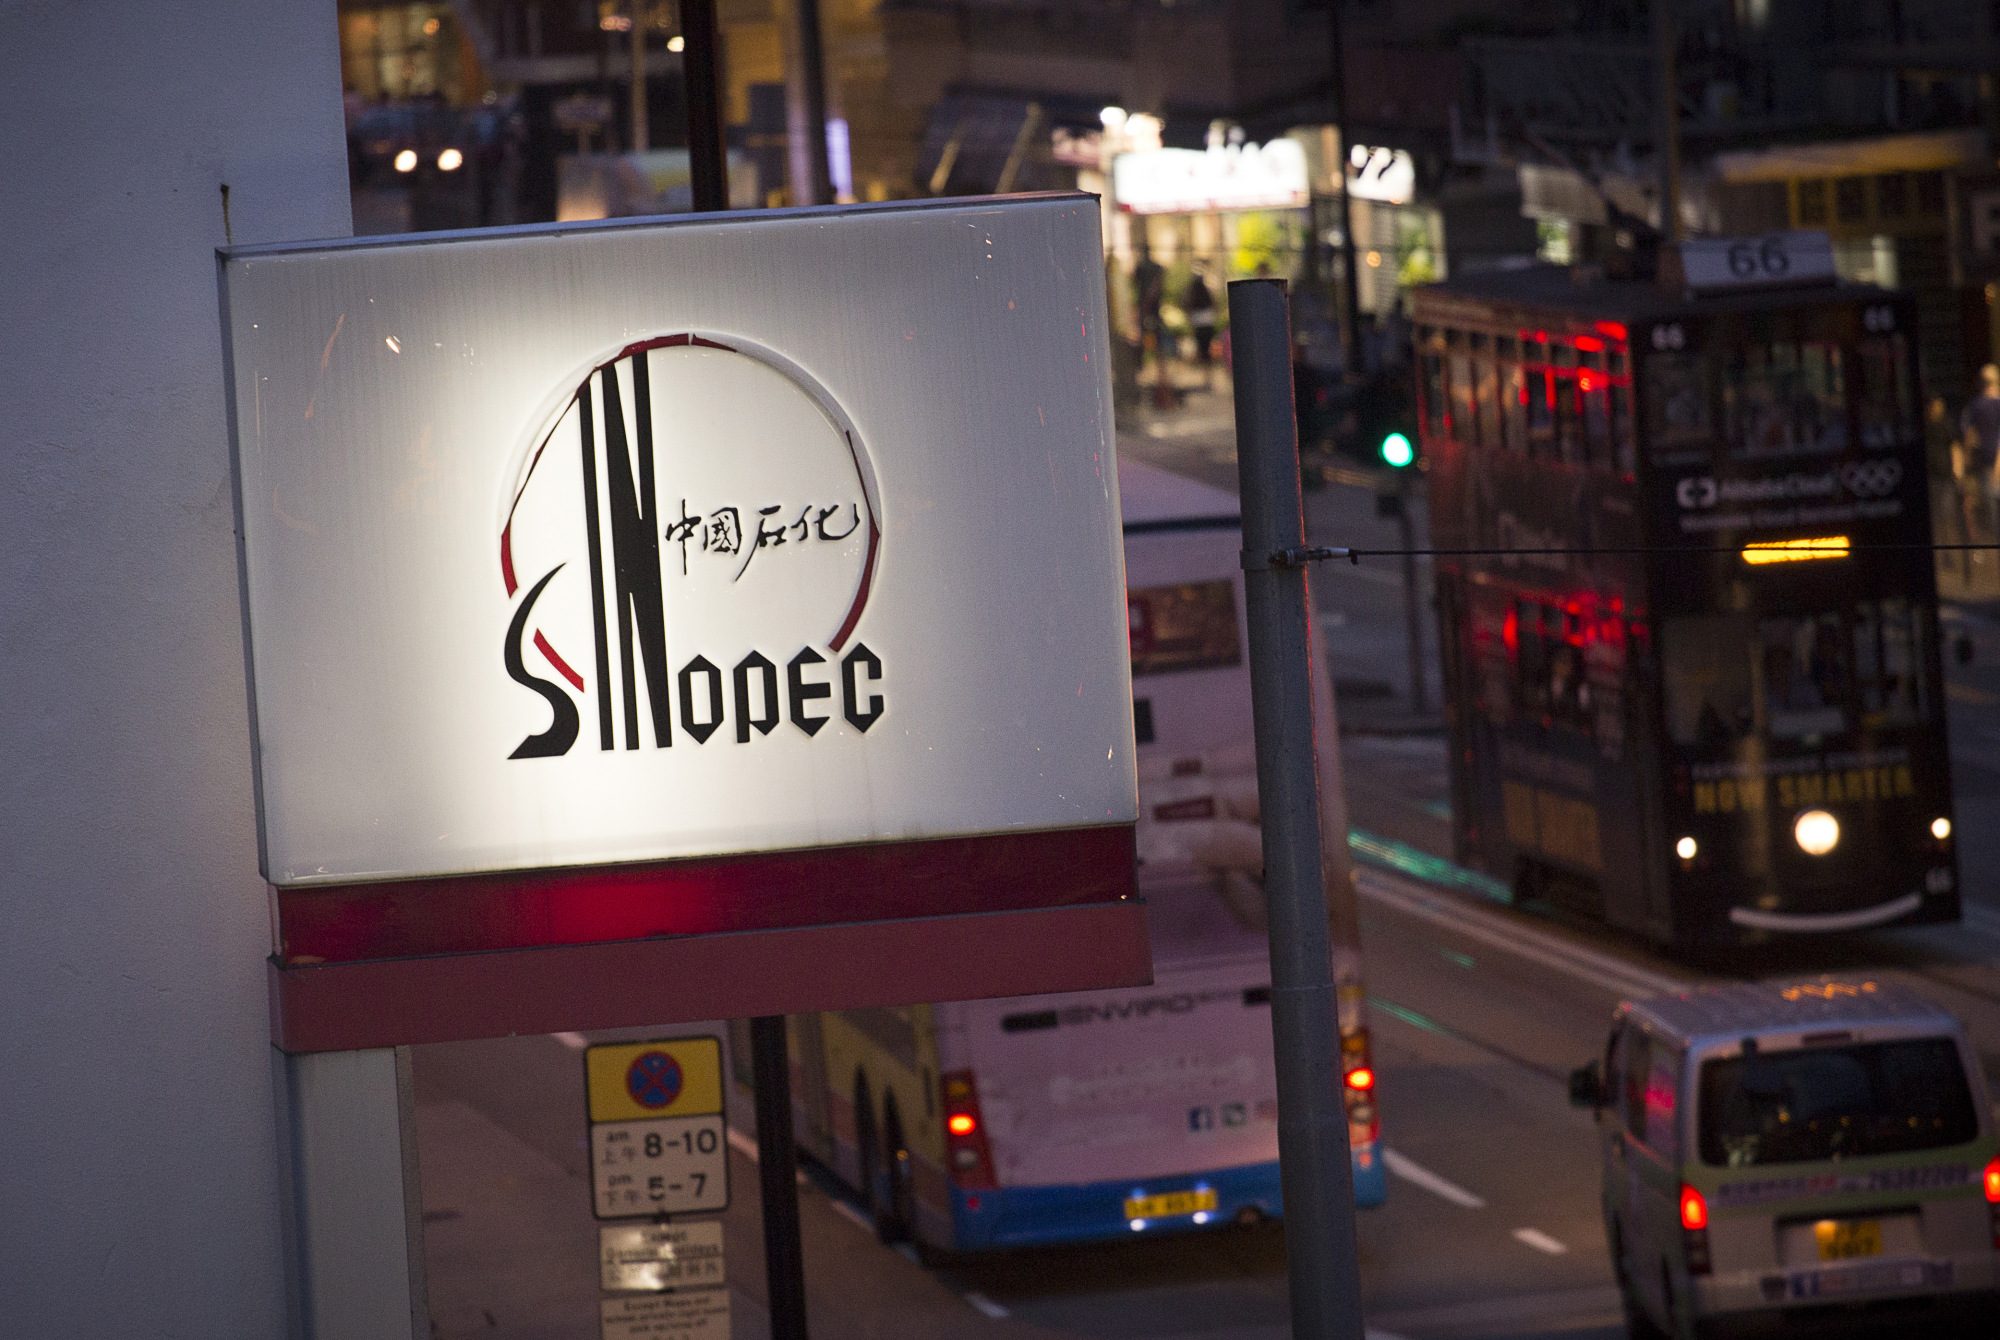 China's Sinopec plans to delist ADSs from London Stock Exchange